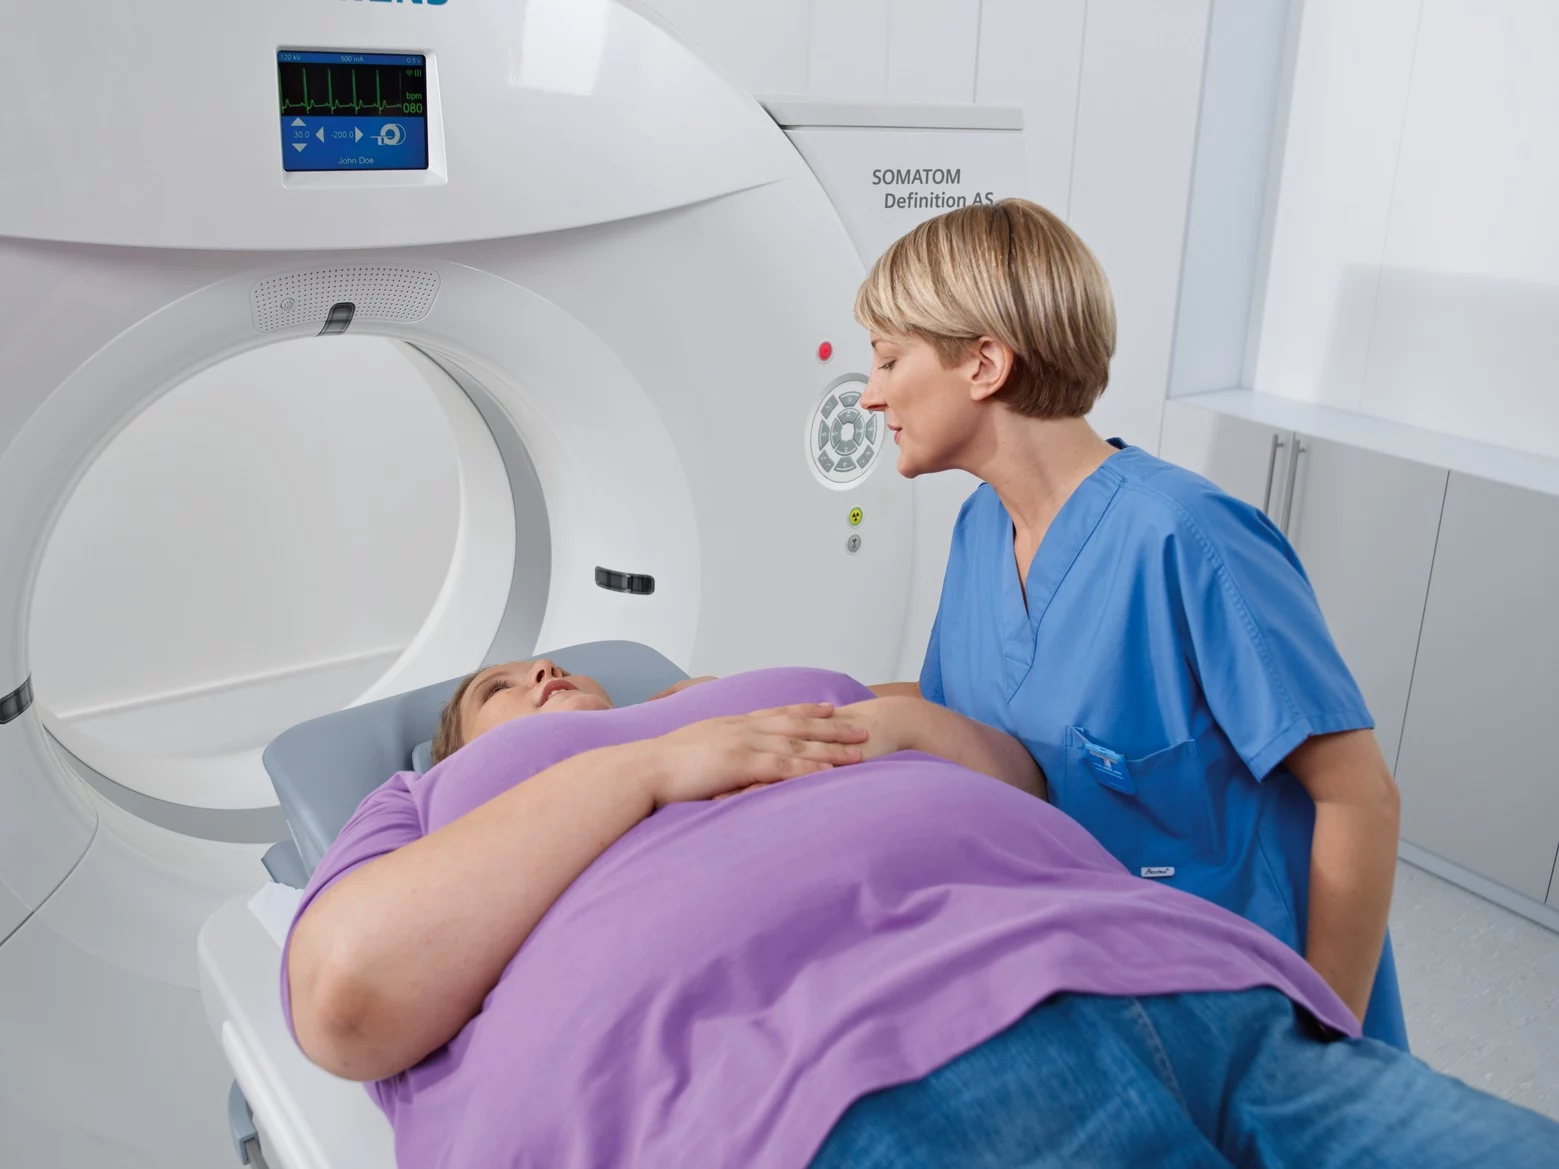 Overweight Patients & CT Scans: Things To Consider